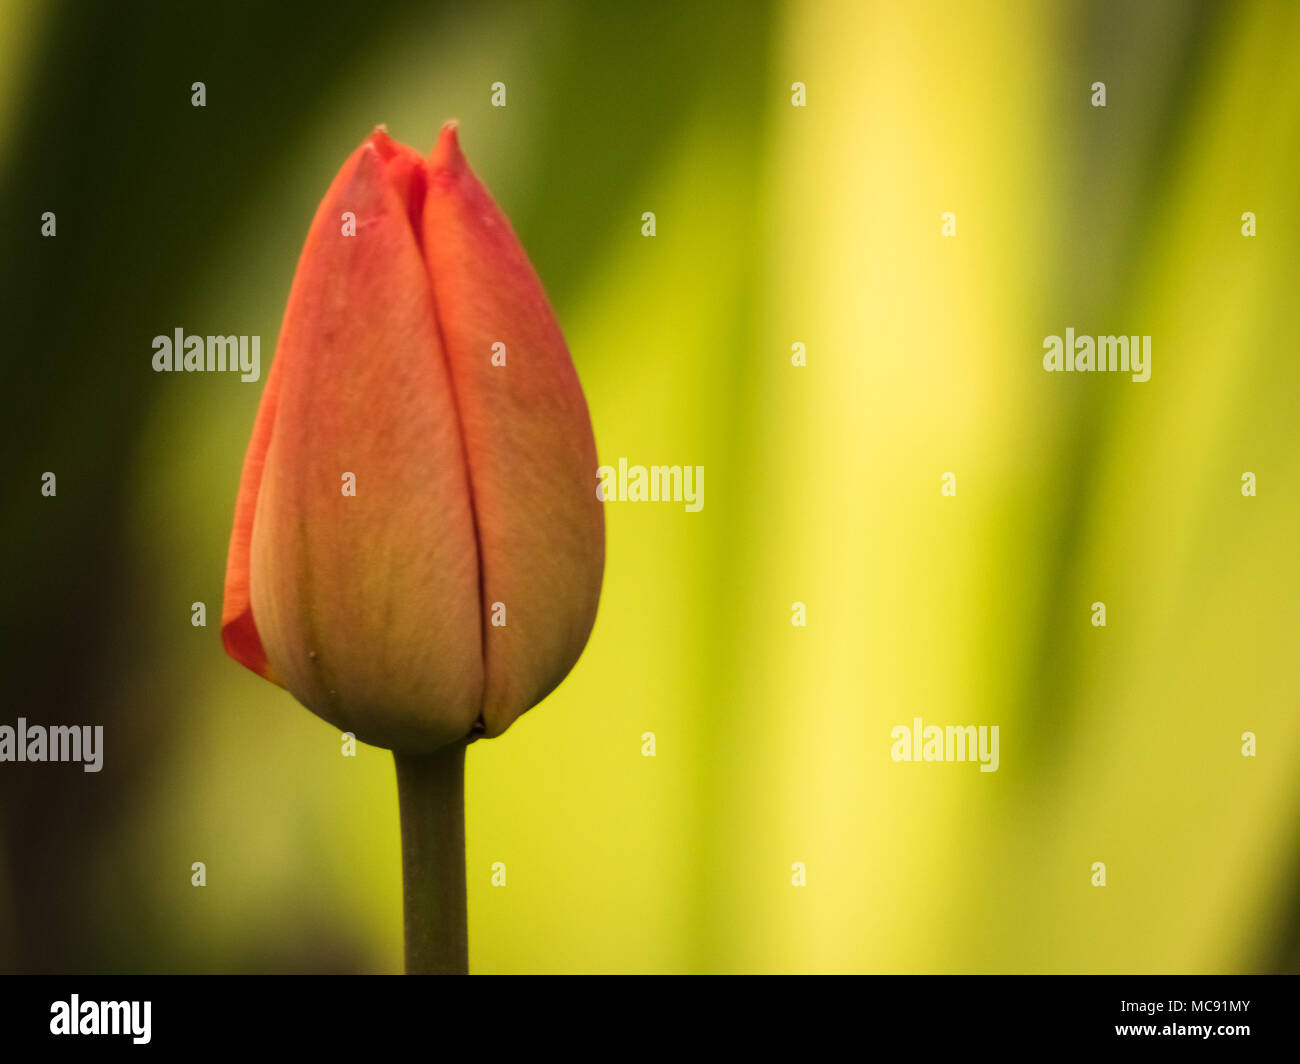 Isolated Red tulip in the garden. Natural yellow and green leaves background with copy space on the right side of the flower. Stock Photo